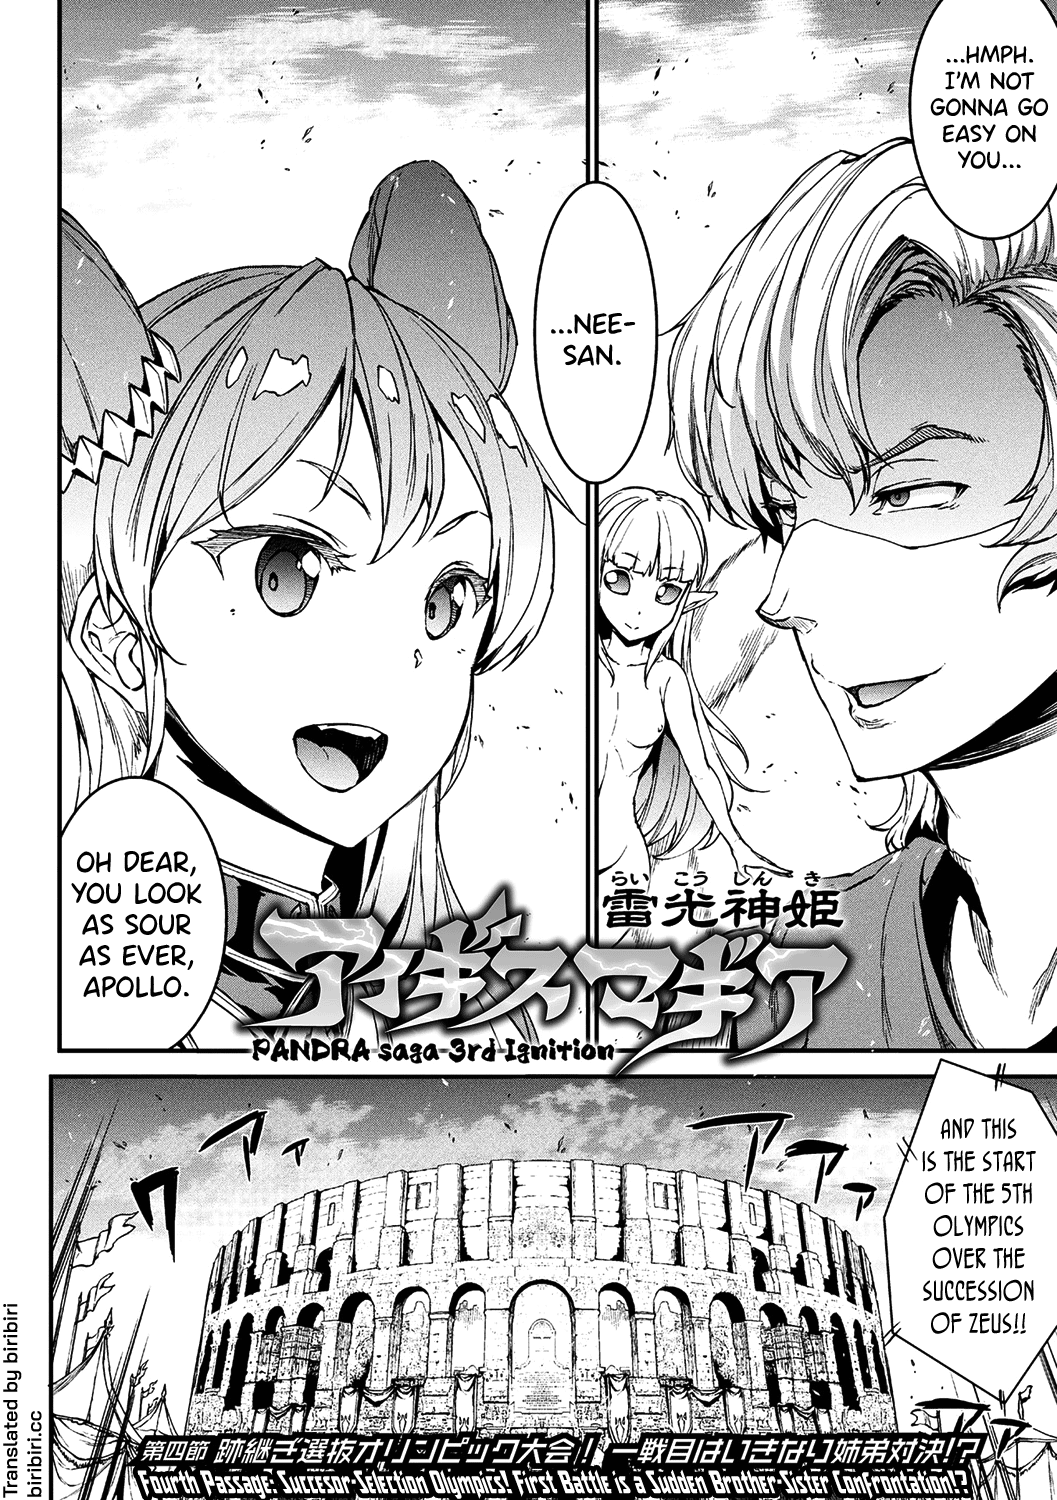 Raikou Shinki Igis Magia -Pandra Saga 3Rd Ignition Vol.1 Chapter 4: Fourth Passage: Succesor Selection Olympics! First Battle Is A Sudden Brother-Sister Confrontation!? - Picture 2